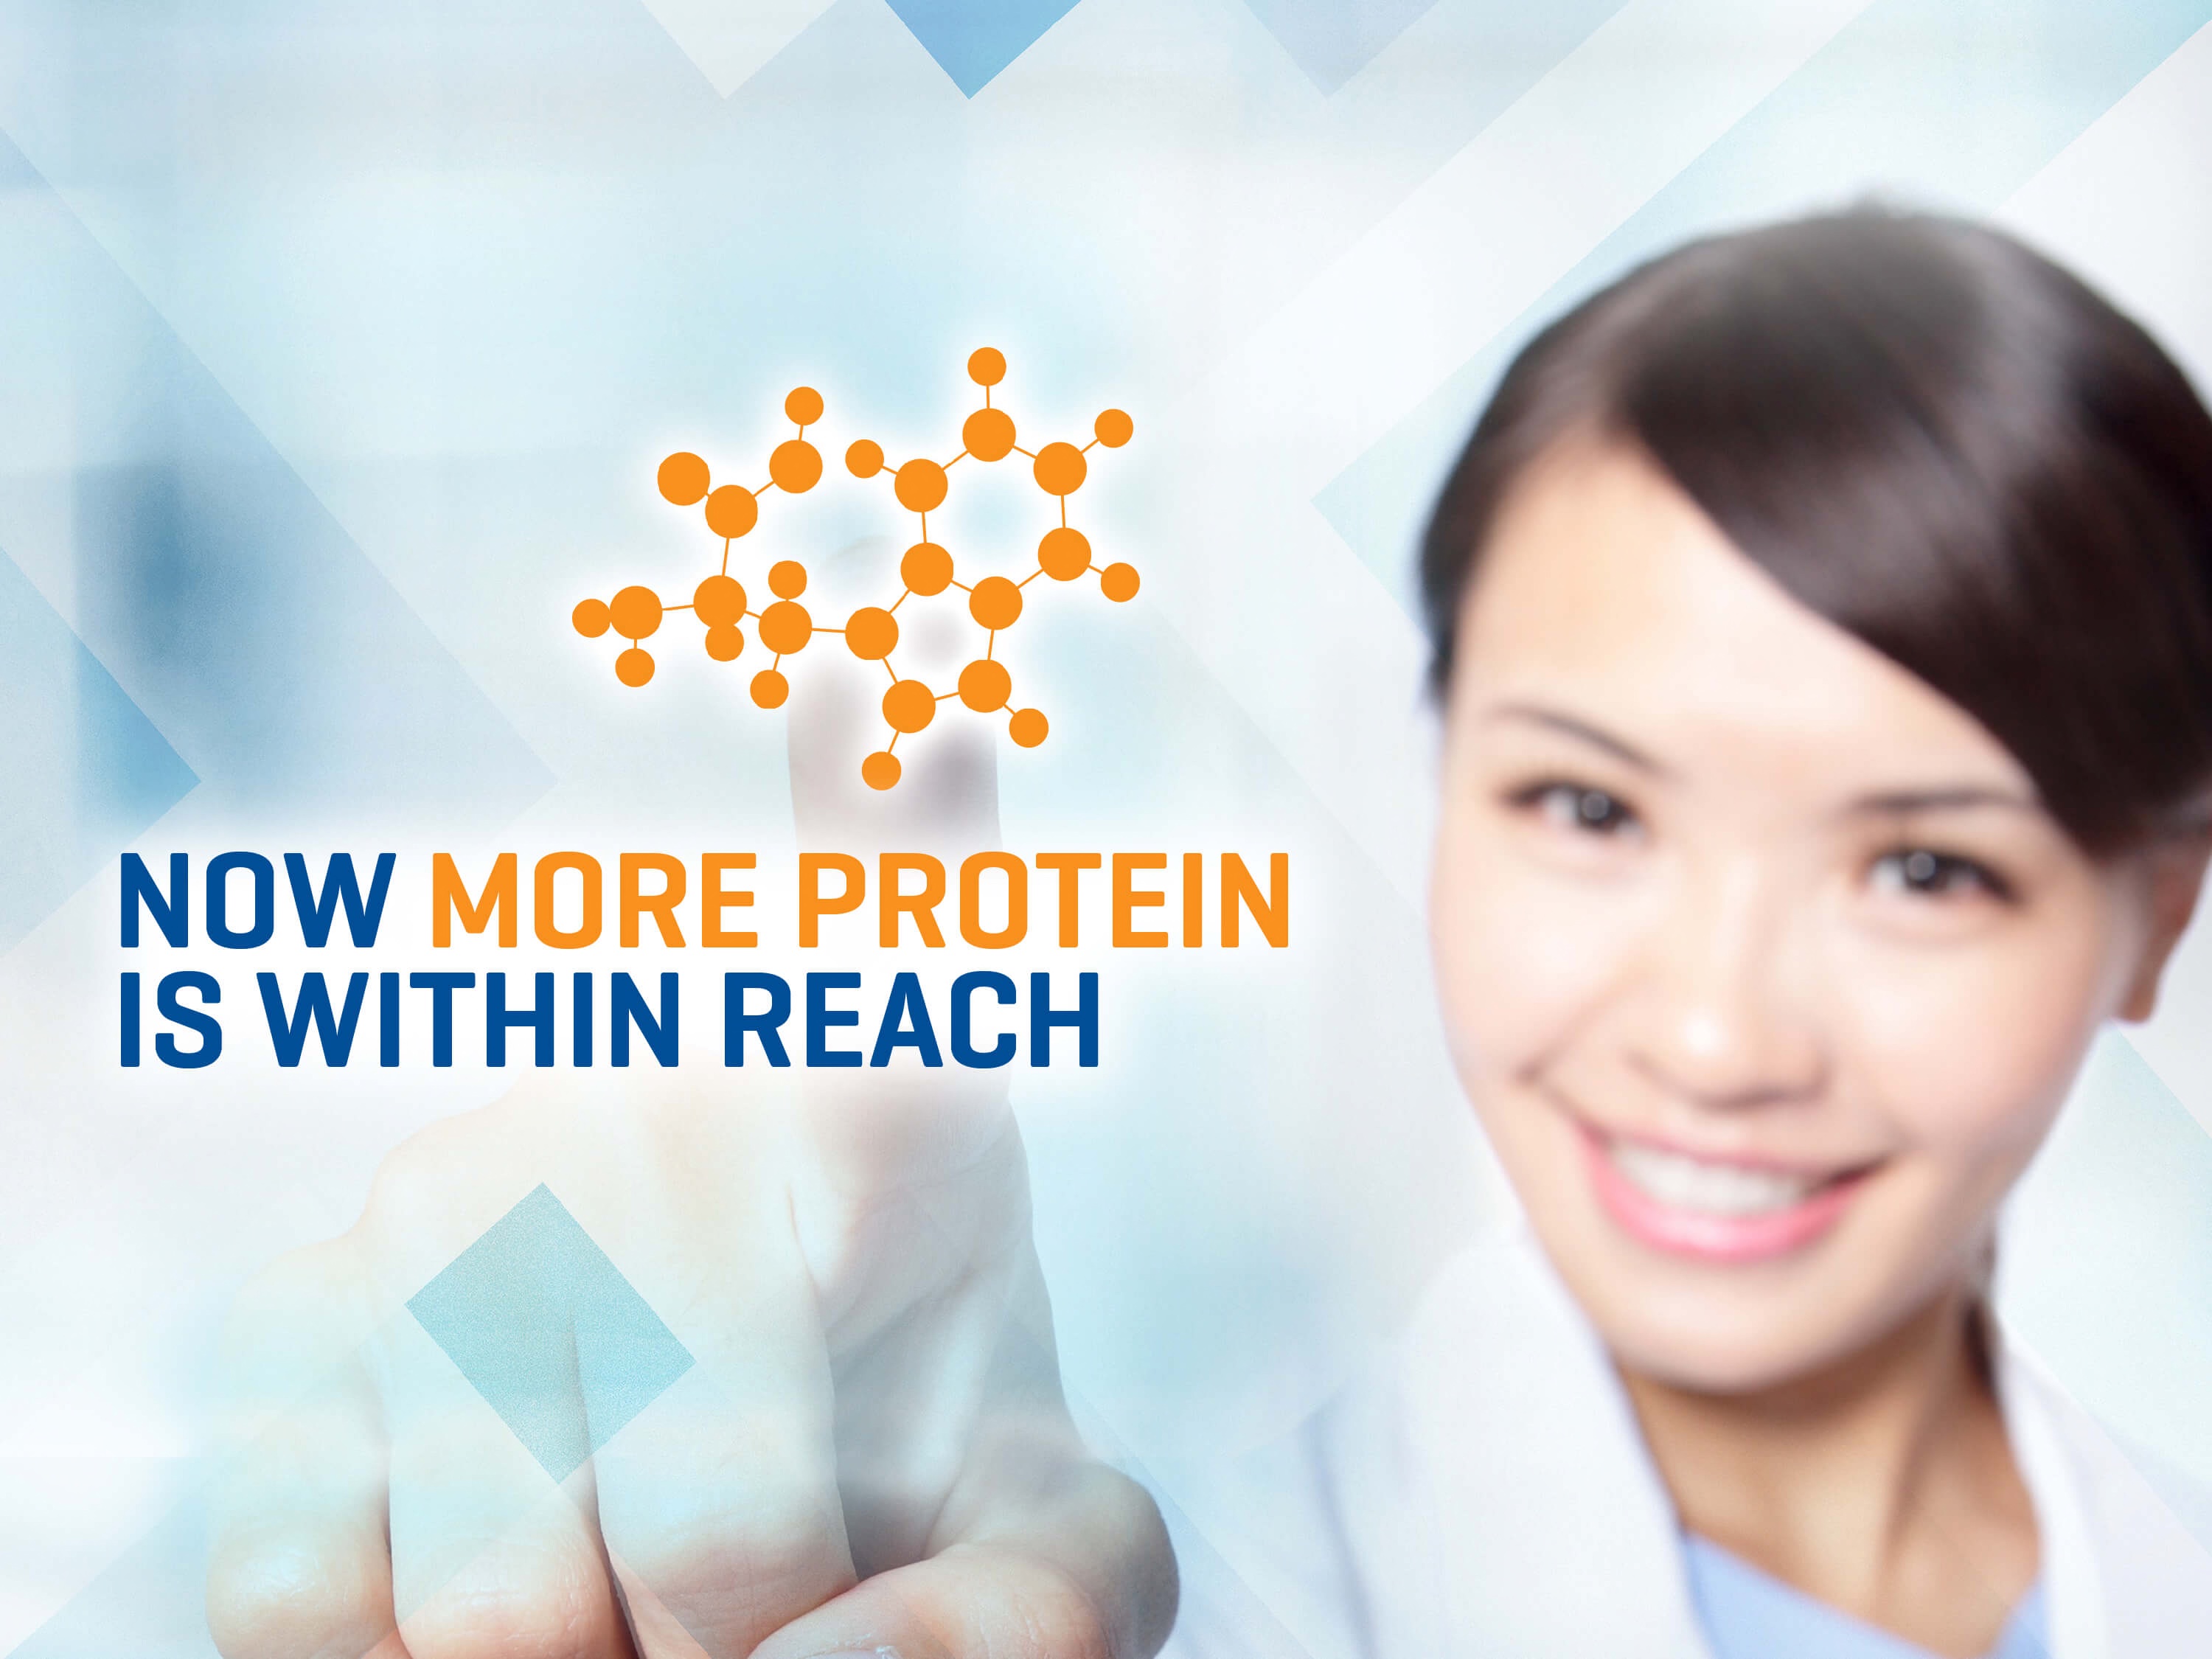 A healthcare professional selects a protein molecule to represent choosing Clinimix Injections with Higher Protein. 